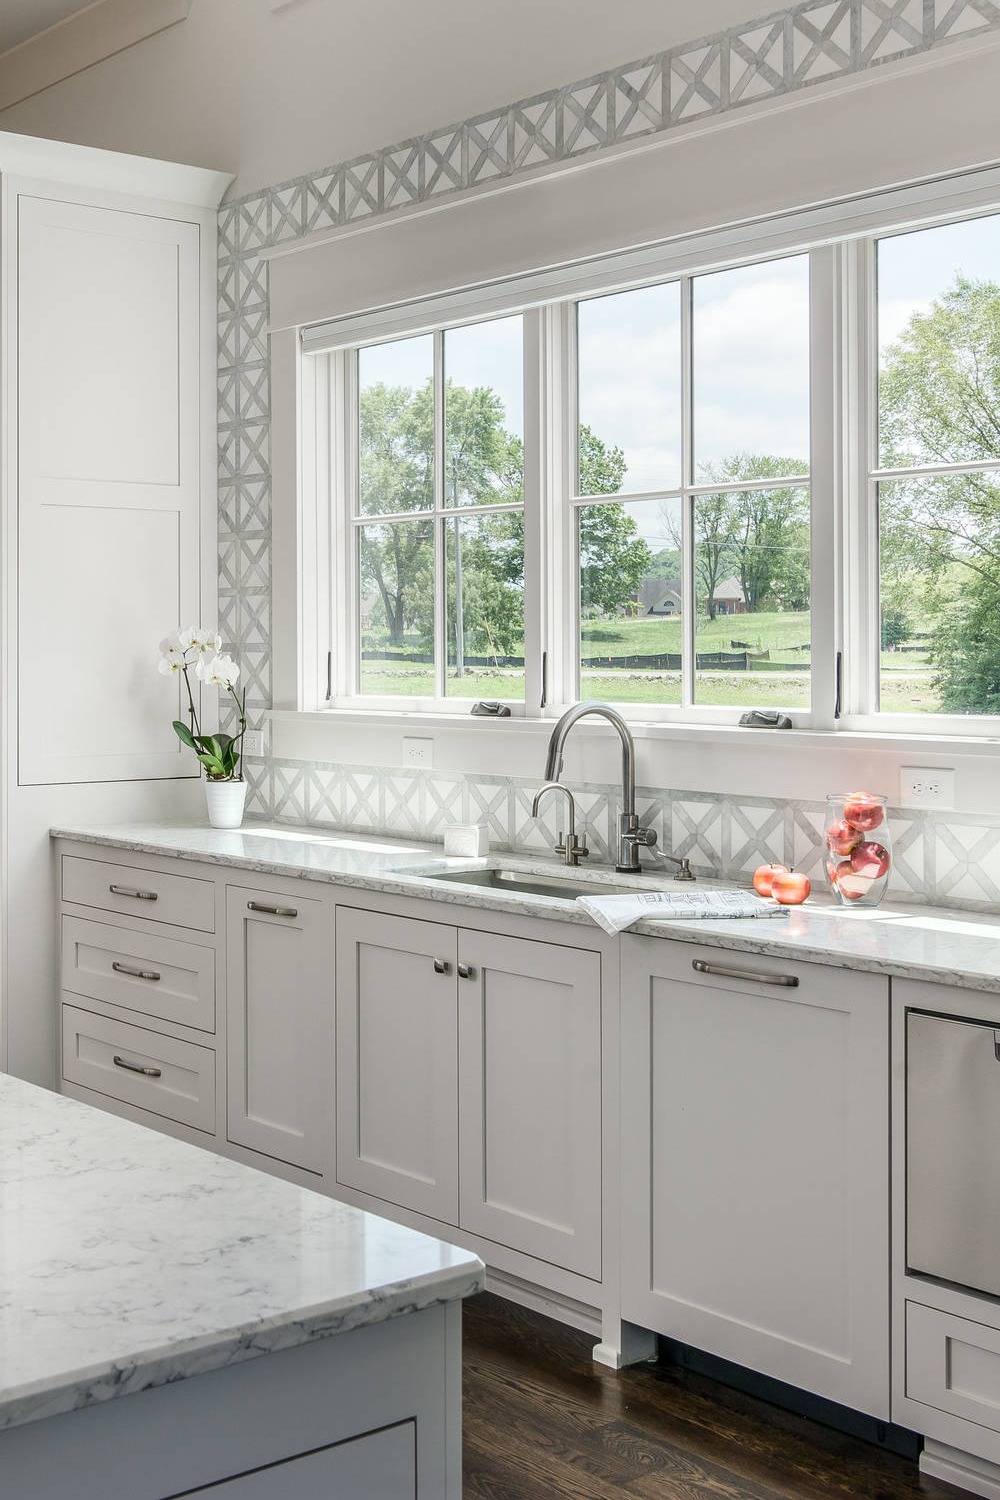 White Kitchen Cabinets Marble Countertop Space Sink Style Hood Elegant Traditional Black Grey Stainless Steel